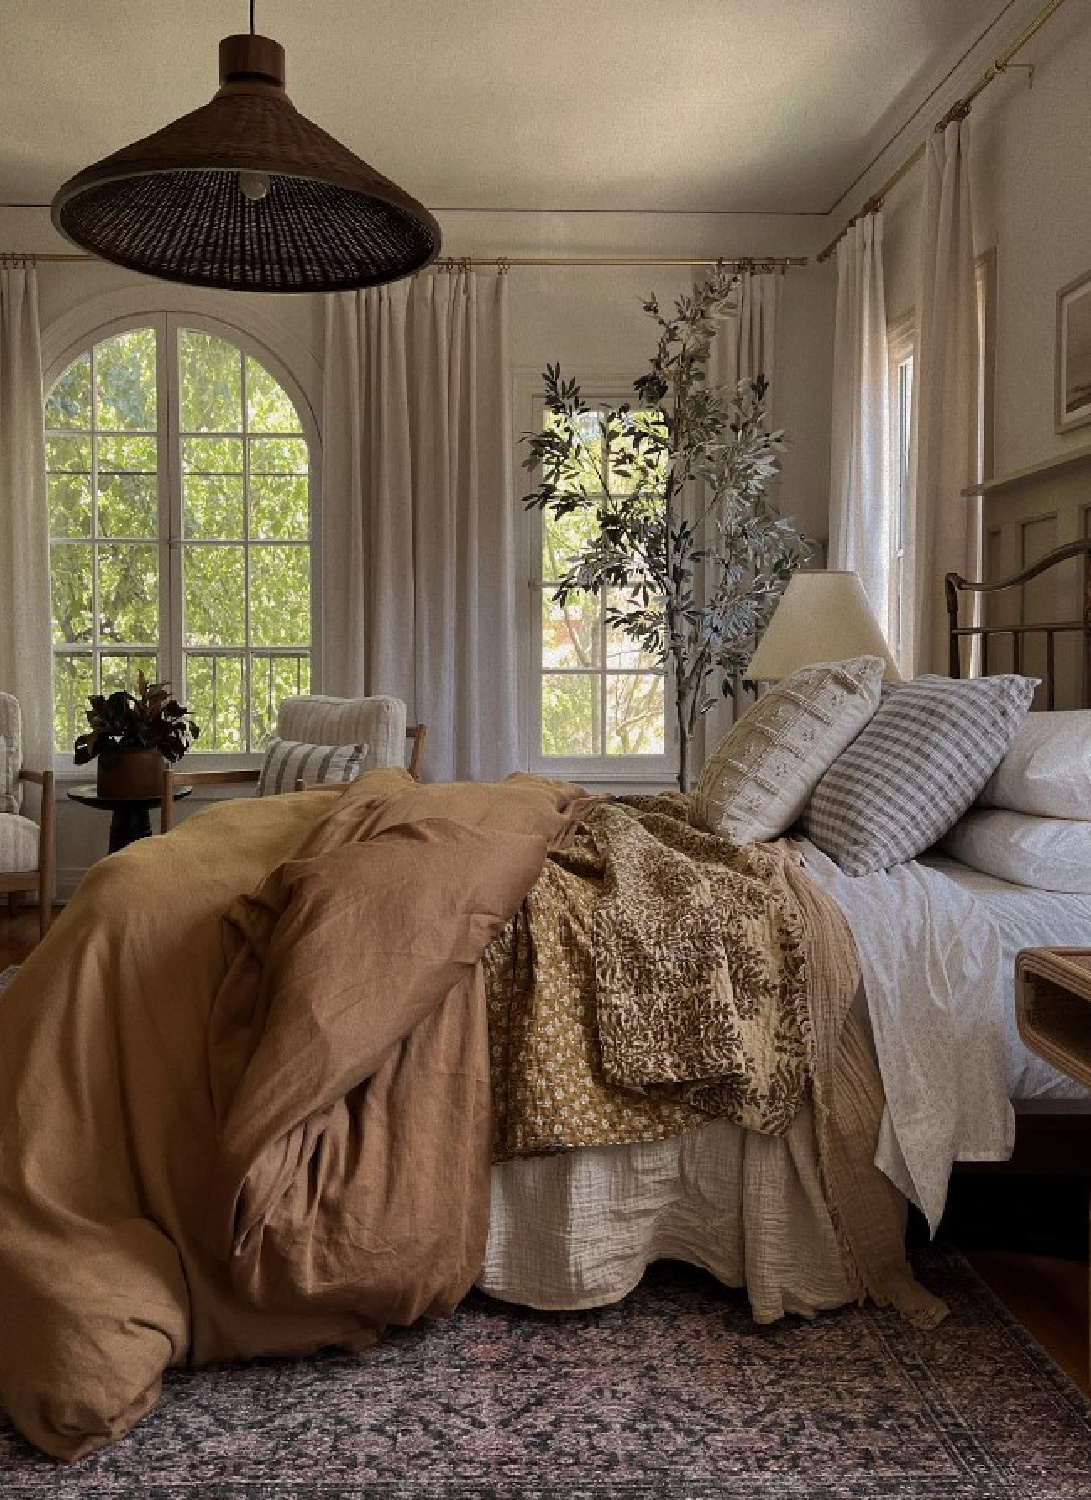 Amber Lewis designed cozy modern rustic romantic bedroom with warm colors, sumptuous bedding and rug, arched windows, and soothing California organic cool vibe. #cozybedrooms #cozyluxe #amberlewisbedroom